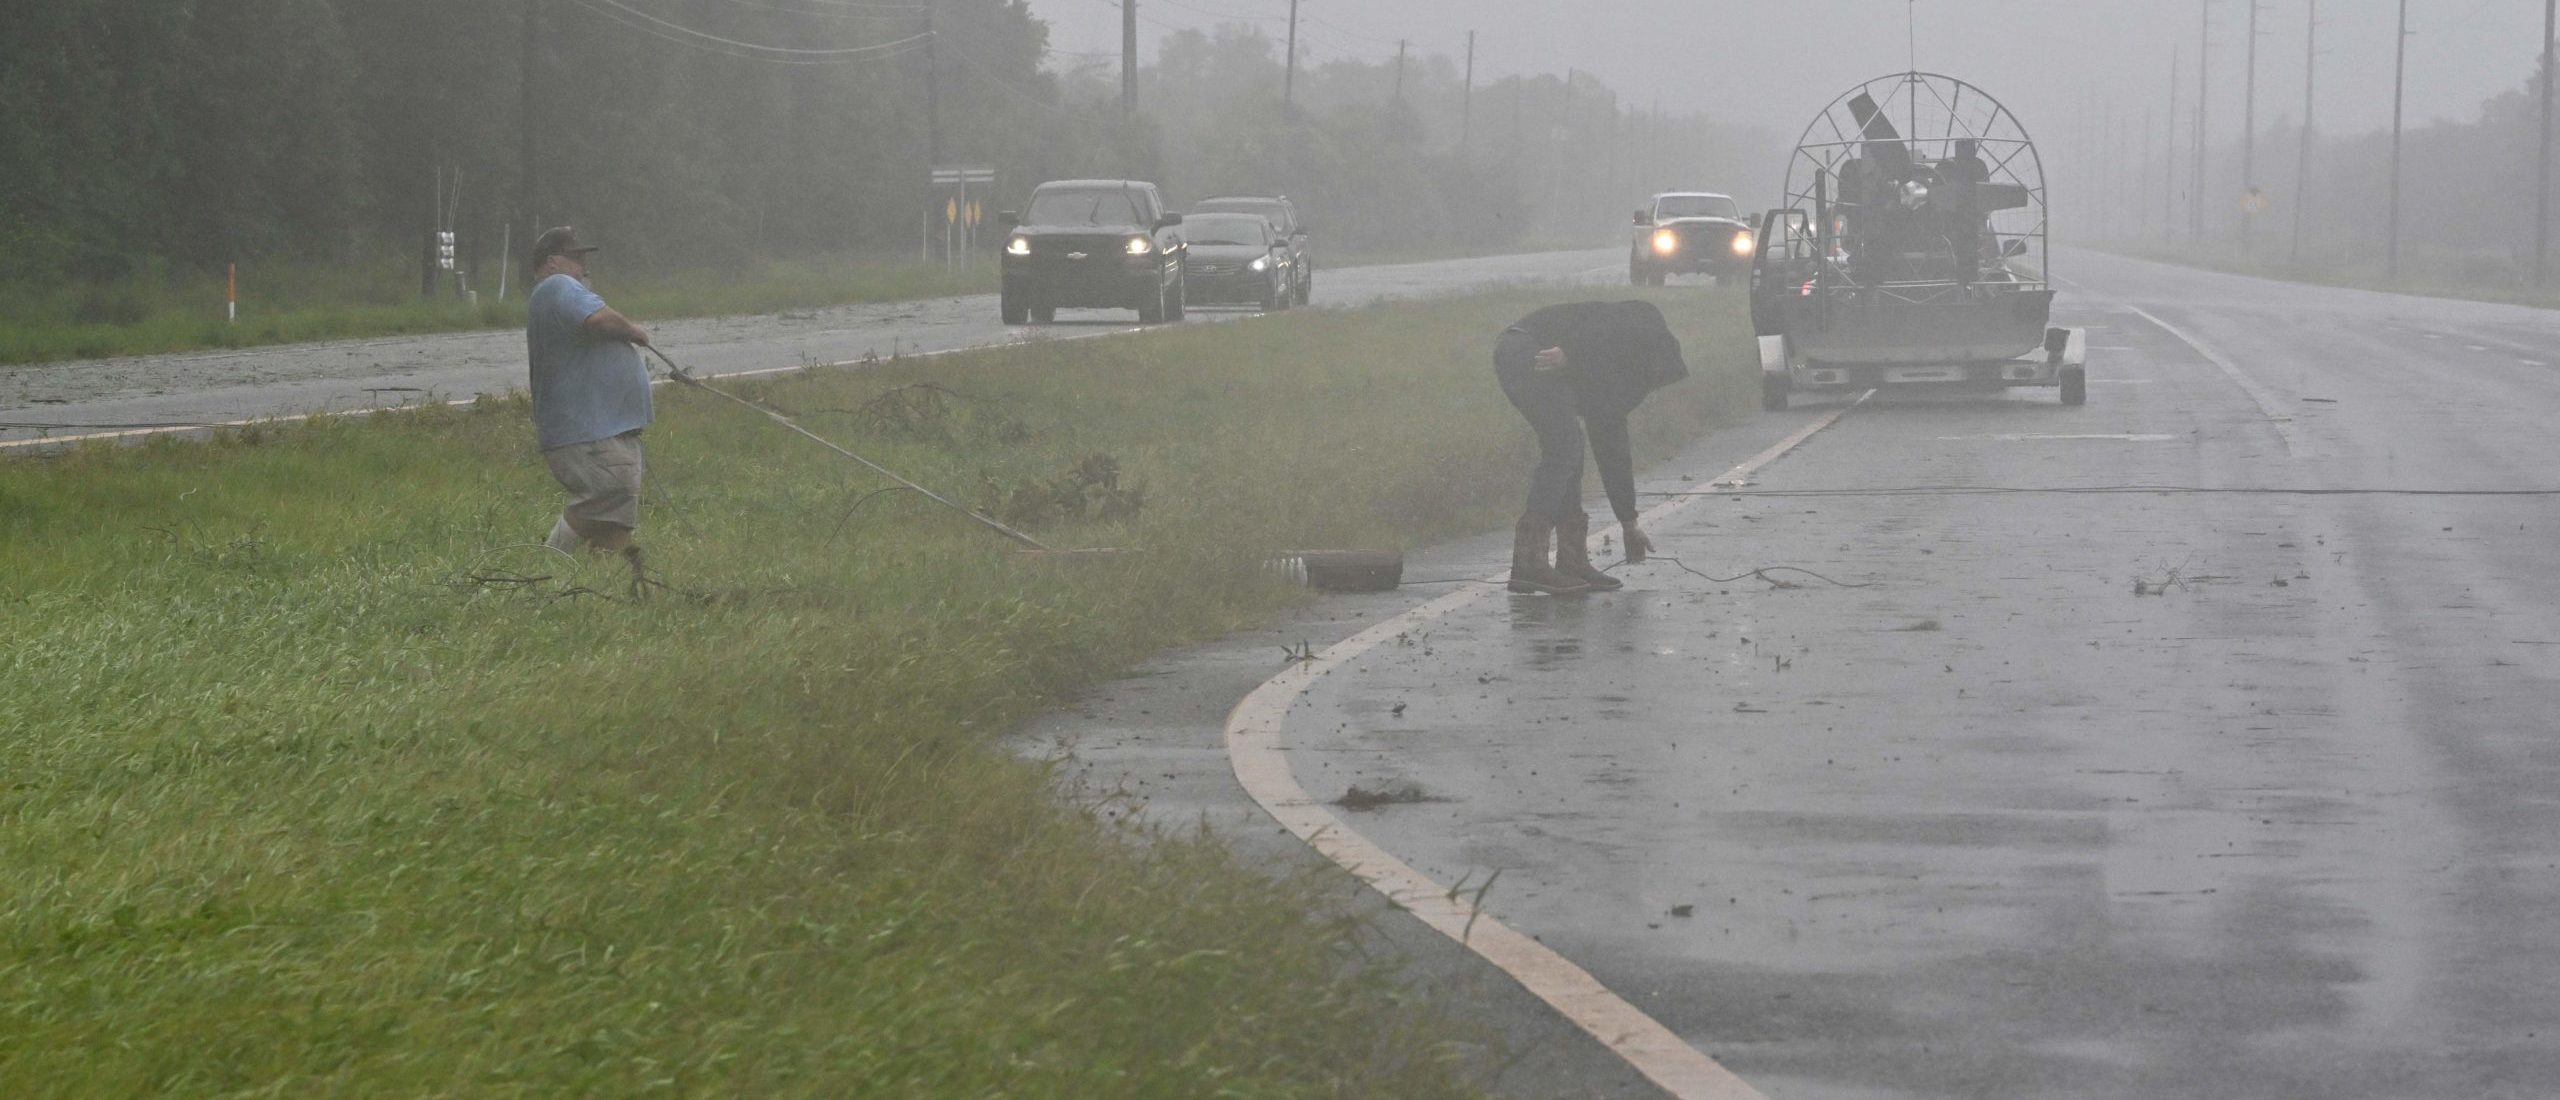 People move debris off a highway in Cross City, Florida, on August 30, 2023, after Hurricane Idalia made landfall. Idalia barreled into the northwest Florida coast as a powerful Category 3 hurricane on Wednesday morning, the US National Hurricane Center said. "Extremely dangerous Category 3 Hurricane #Idalia makes landfall in the Florida Big Bend," it posted on X, formerly known as Twitter, adding that Idalia was causing "catastrophic storm surge and damaging winds." (Photo by Chandan Khanna / AFP) (Photo by CHANDAN KHANNA/AFP via Getty Images)